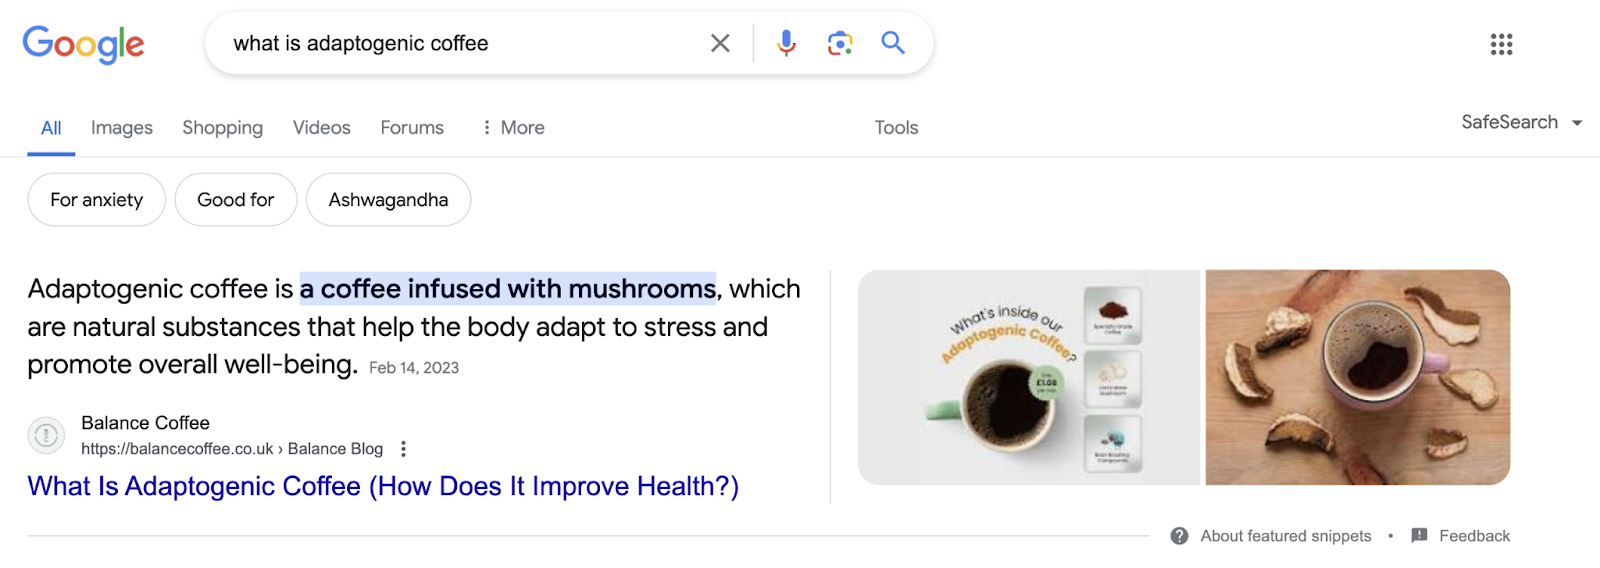 search for "what is adaptogenic coffee" has featured snippet with two images